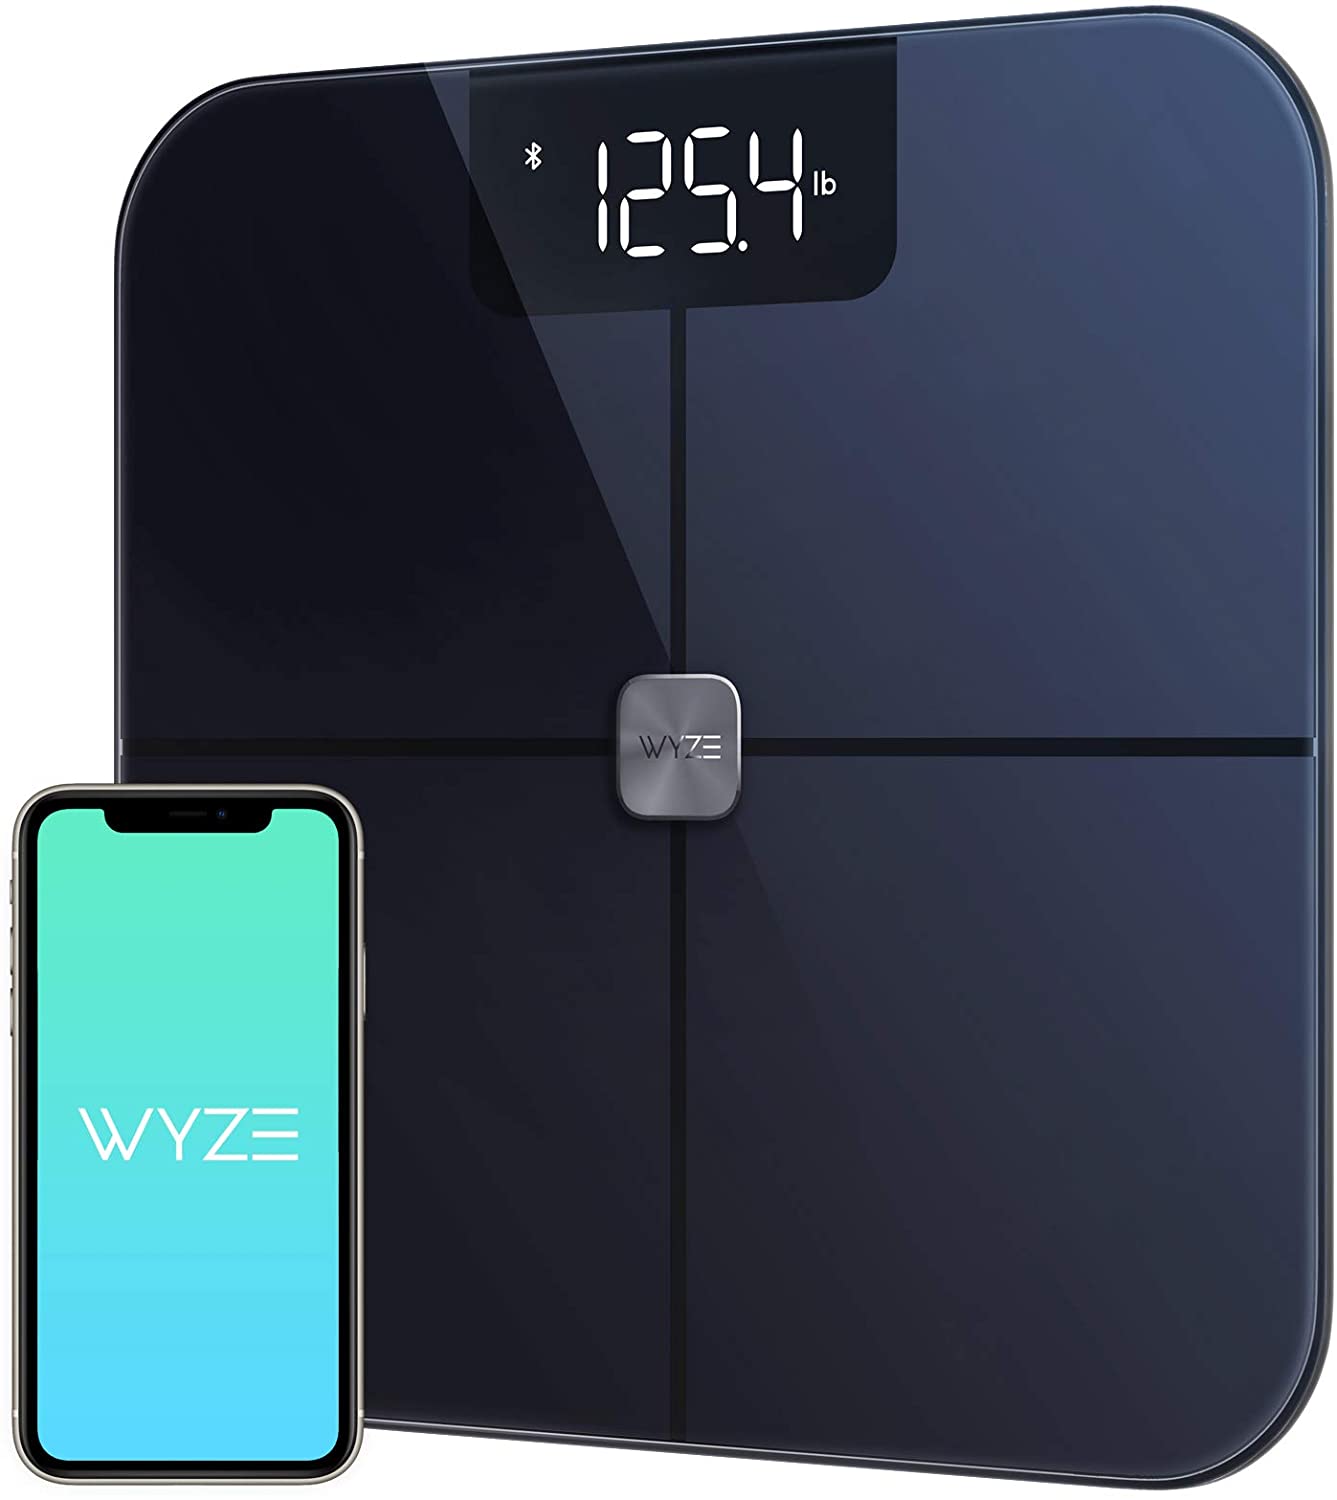 EQUAL Smart Digital Bathroom Scale, Scales for Body Weight and Fat